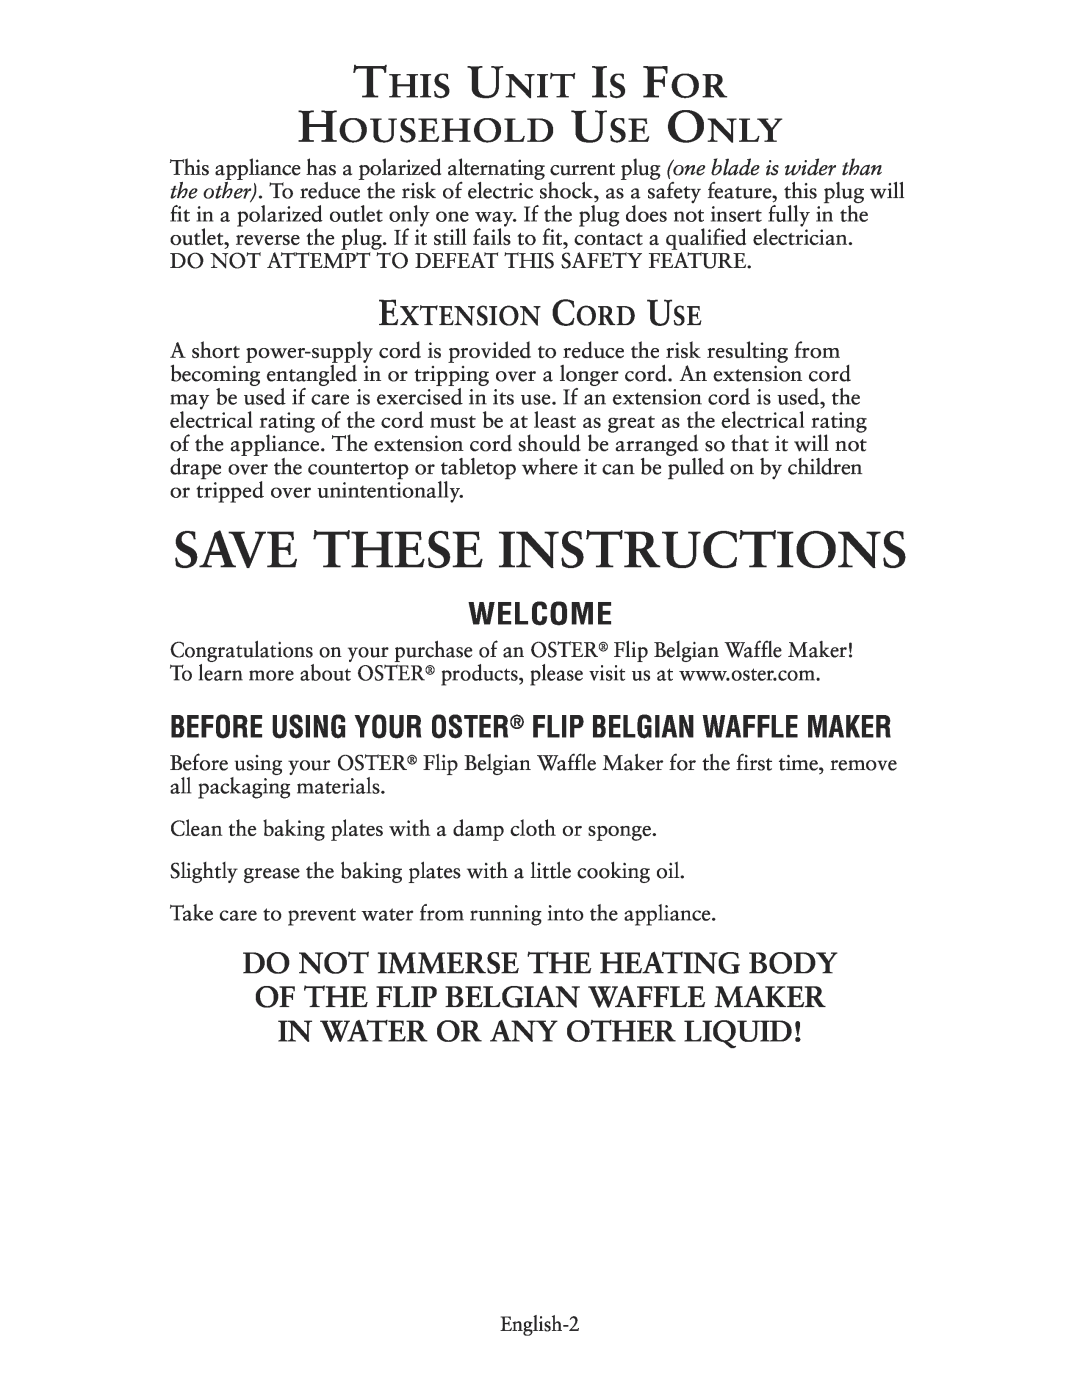 Oster CKSTWFBF10 Save These Instructions, Welcome, Before Using Your Oster Flip Belgian Waffle Maker, Extension Cord Use 